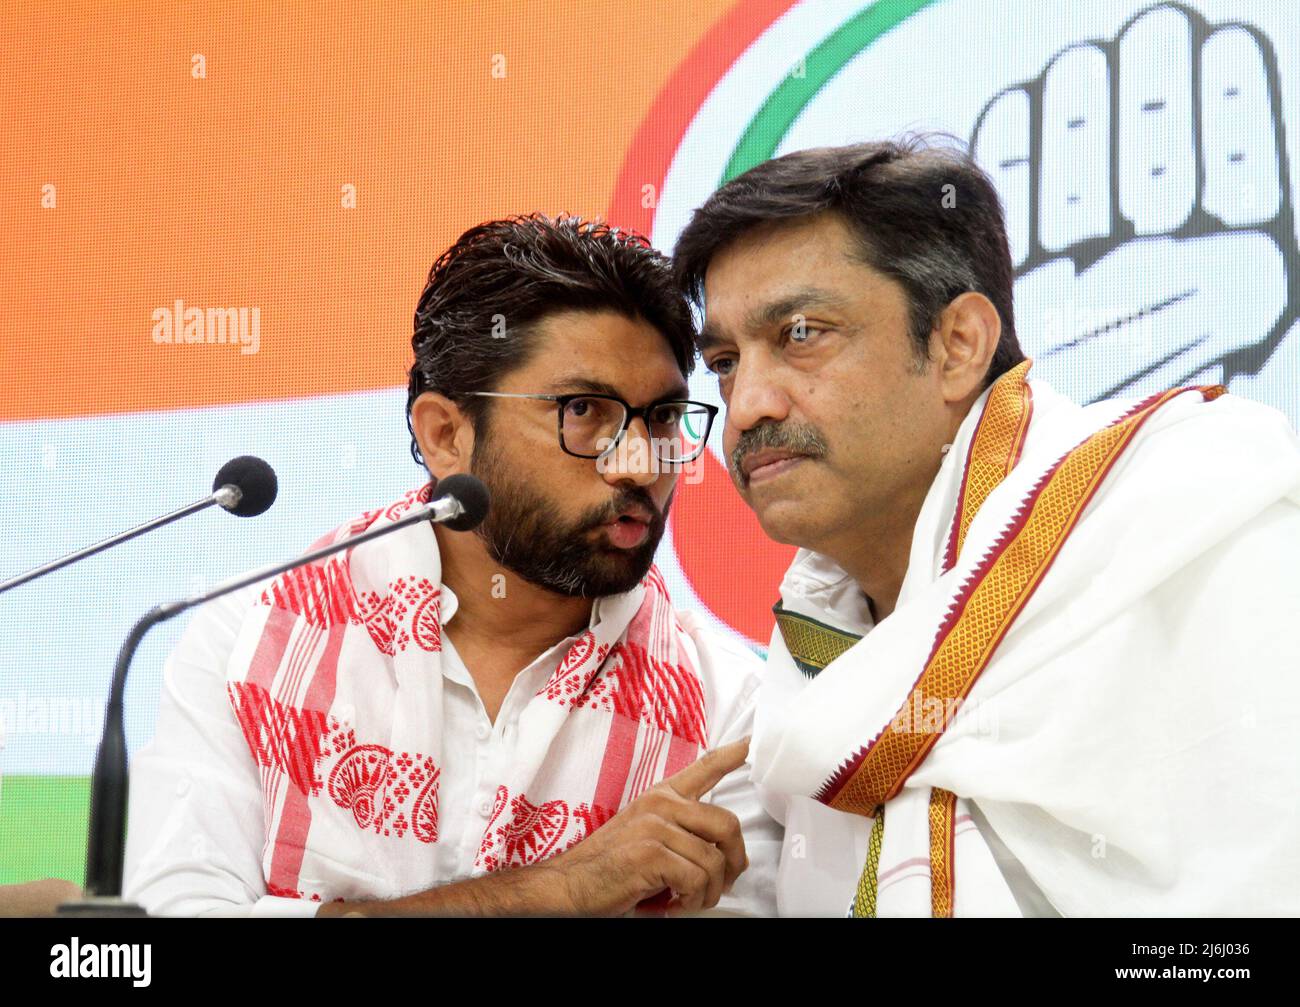 Gujrat independent MLA (Member of Legislative Assembly) Jignesh Mevani (L) along with congress party member Rajesh Lilothia (R) address to the media during a press conference at the Indian National Congress party headquarter in New Delhi. After he was released on bail over two cased filed on April 20, 2022 and April 25, 2022 in Assam State. He told the media it was pre planned conspiracy to destroy him and also slammed the central Prime Minister Narendra Modi's government. (Photo by Naveen Sharma / SOPA Images/Sipa USA) Stock Photo